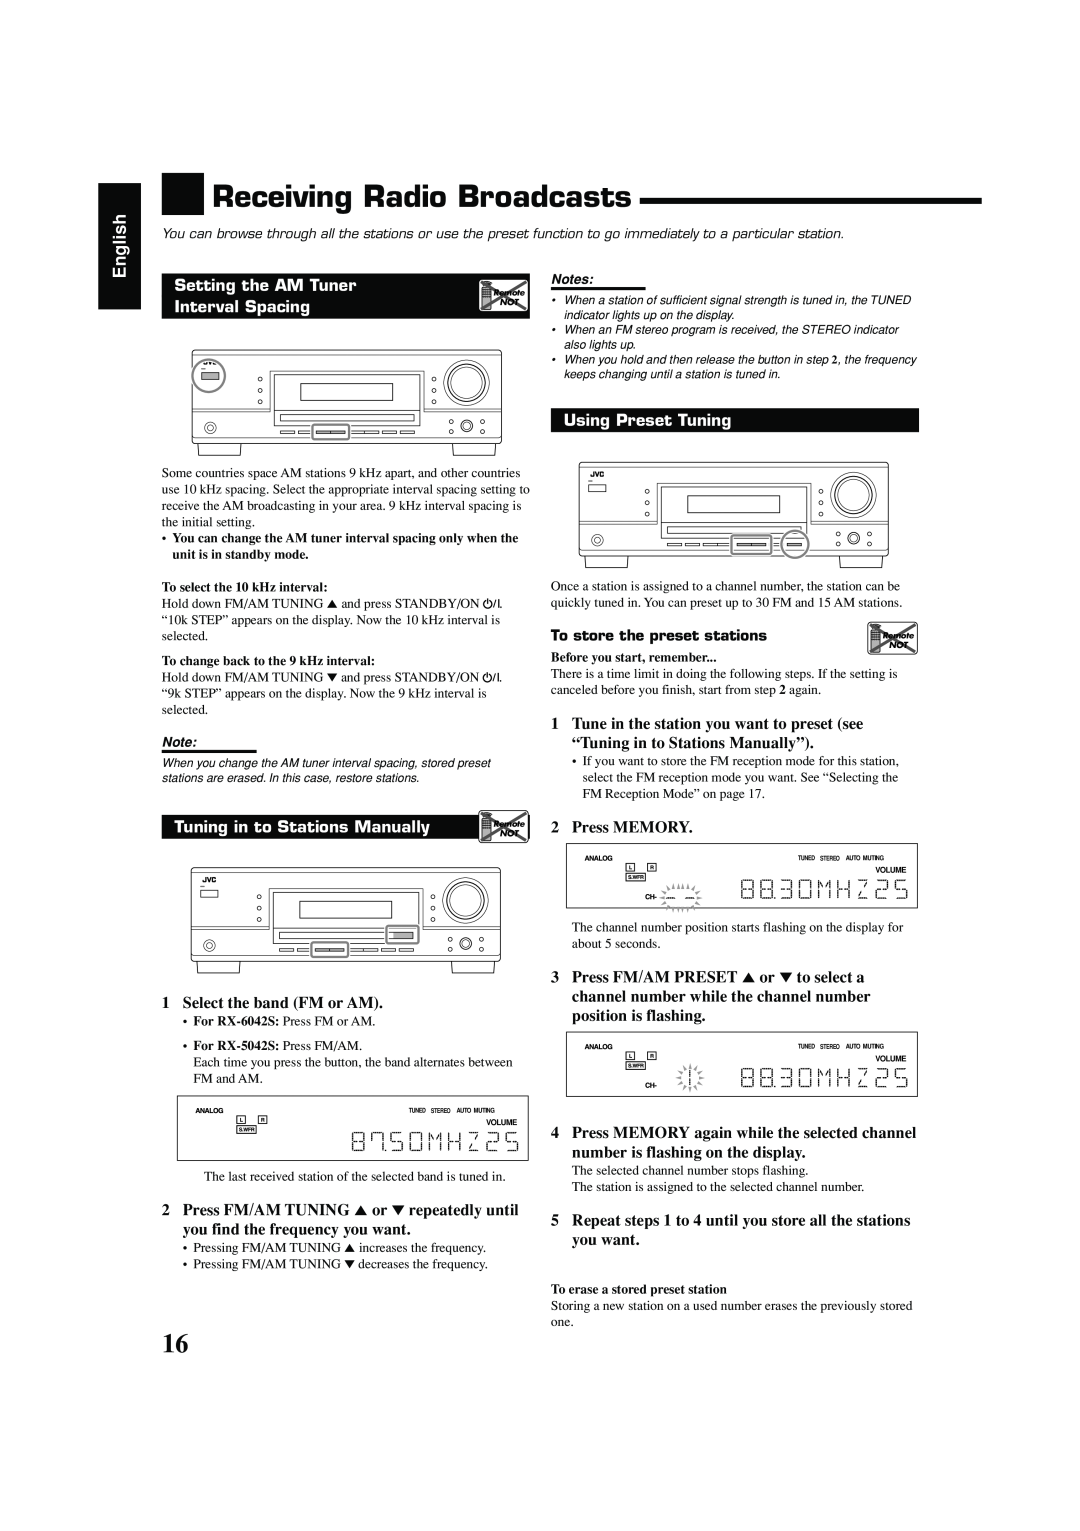 JVC LVT1140-004A manual Receiving Radio Broadcasts, English, Setting the AM Tuner, Interval Spacing, Using Preset Tuning 